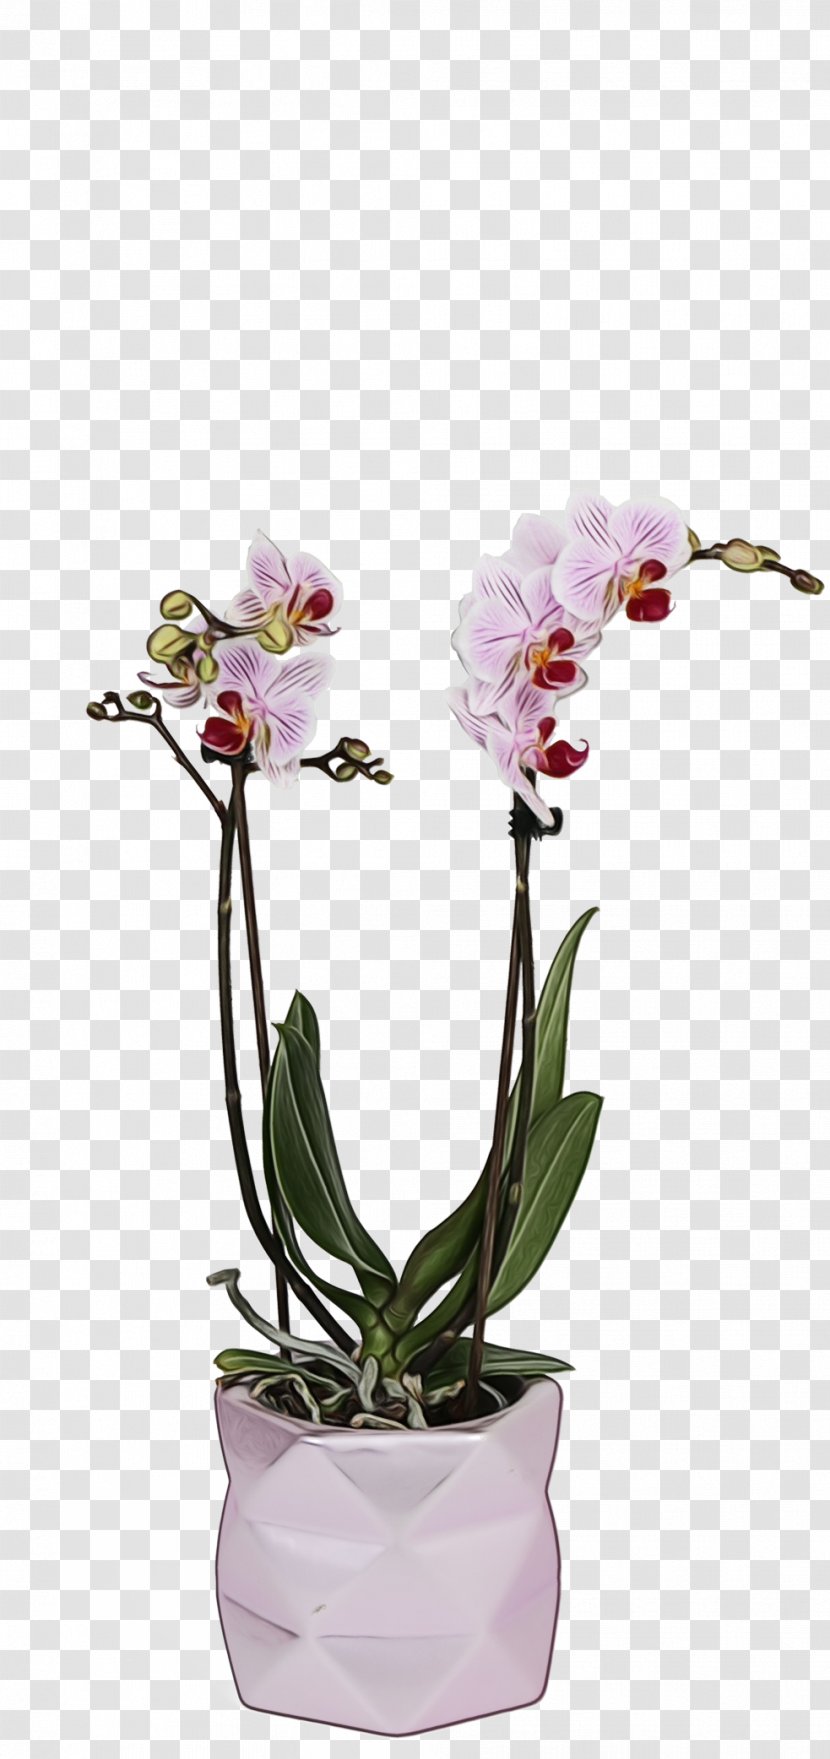 Watercolor Flower Background - Moth Orchid - Cattleya Houseplant Transparent PNG